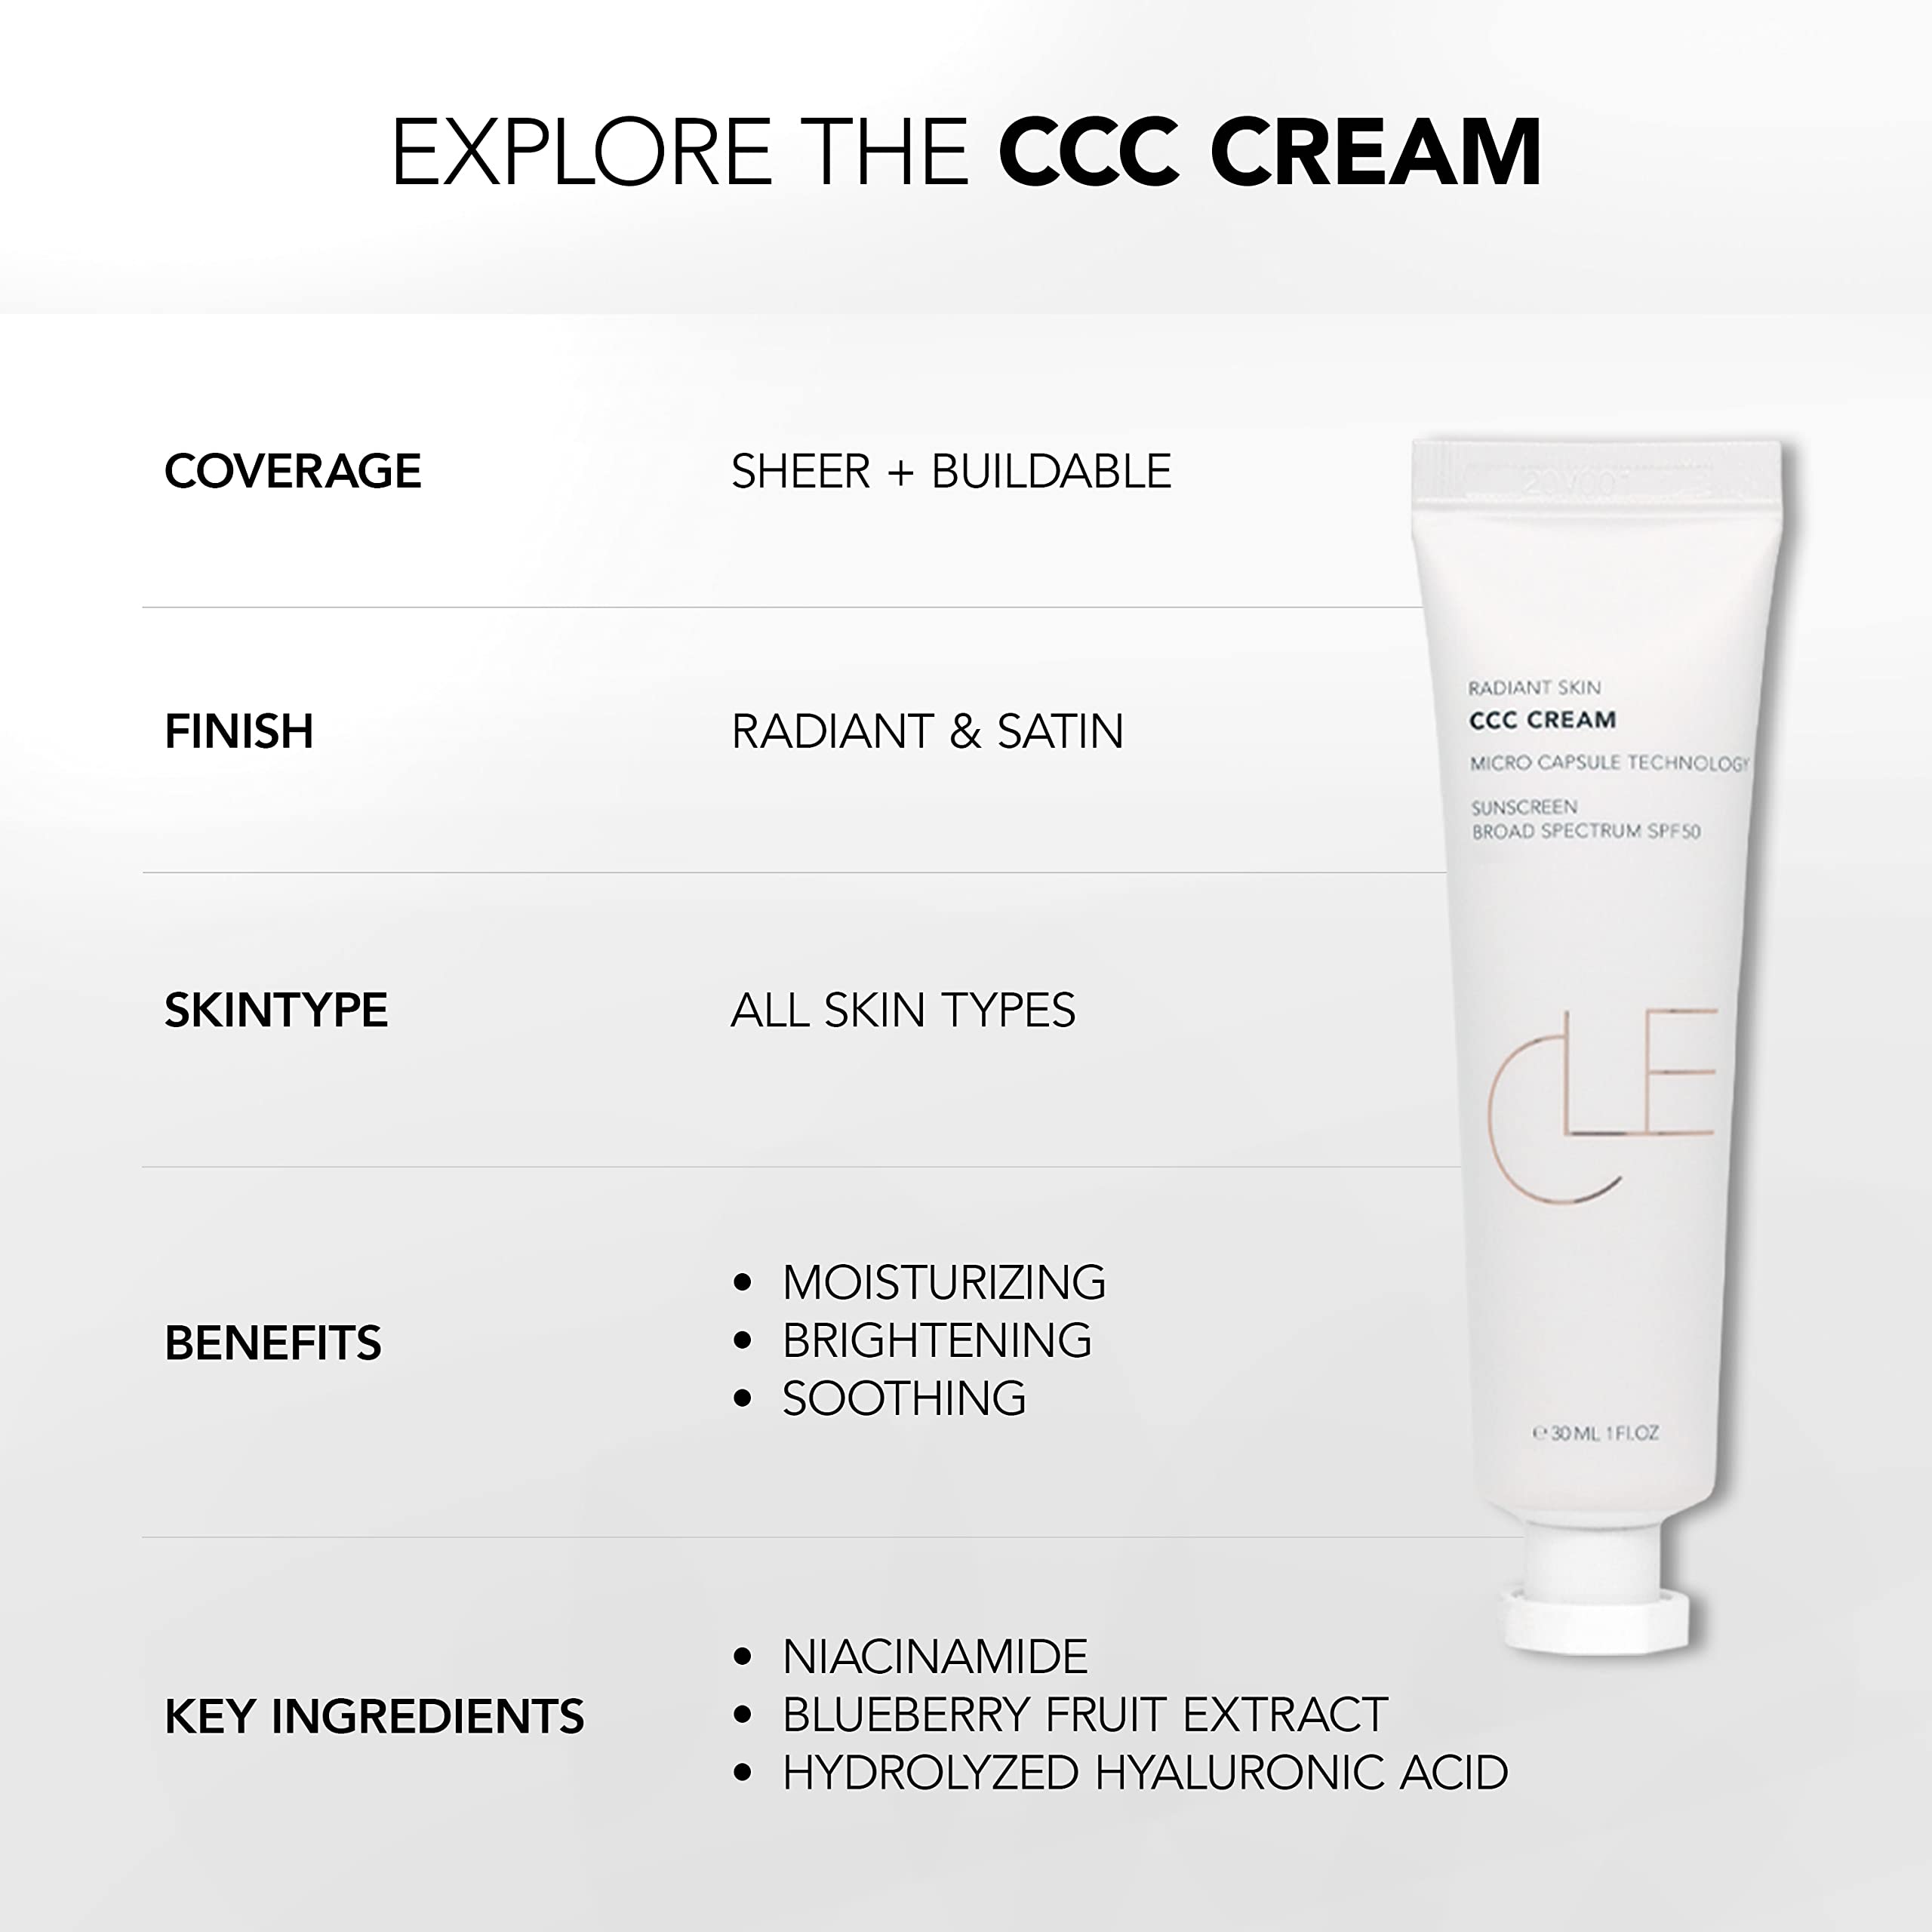 Cle Cosmetics CCC Cream Foundation, Color Control and Change Cream That's a BB and CC Cream Hybrid, Multi-purpose Beauty Primer and Facial Foundation, 1 fl oz SPF 30 (Neutral Medium Light 201)